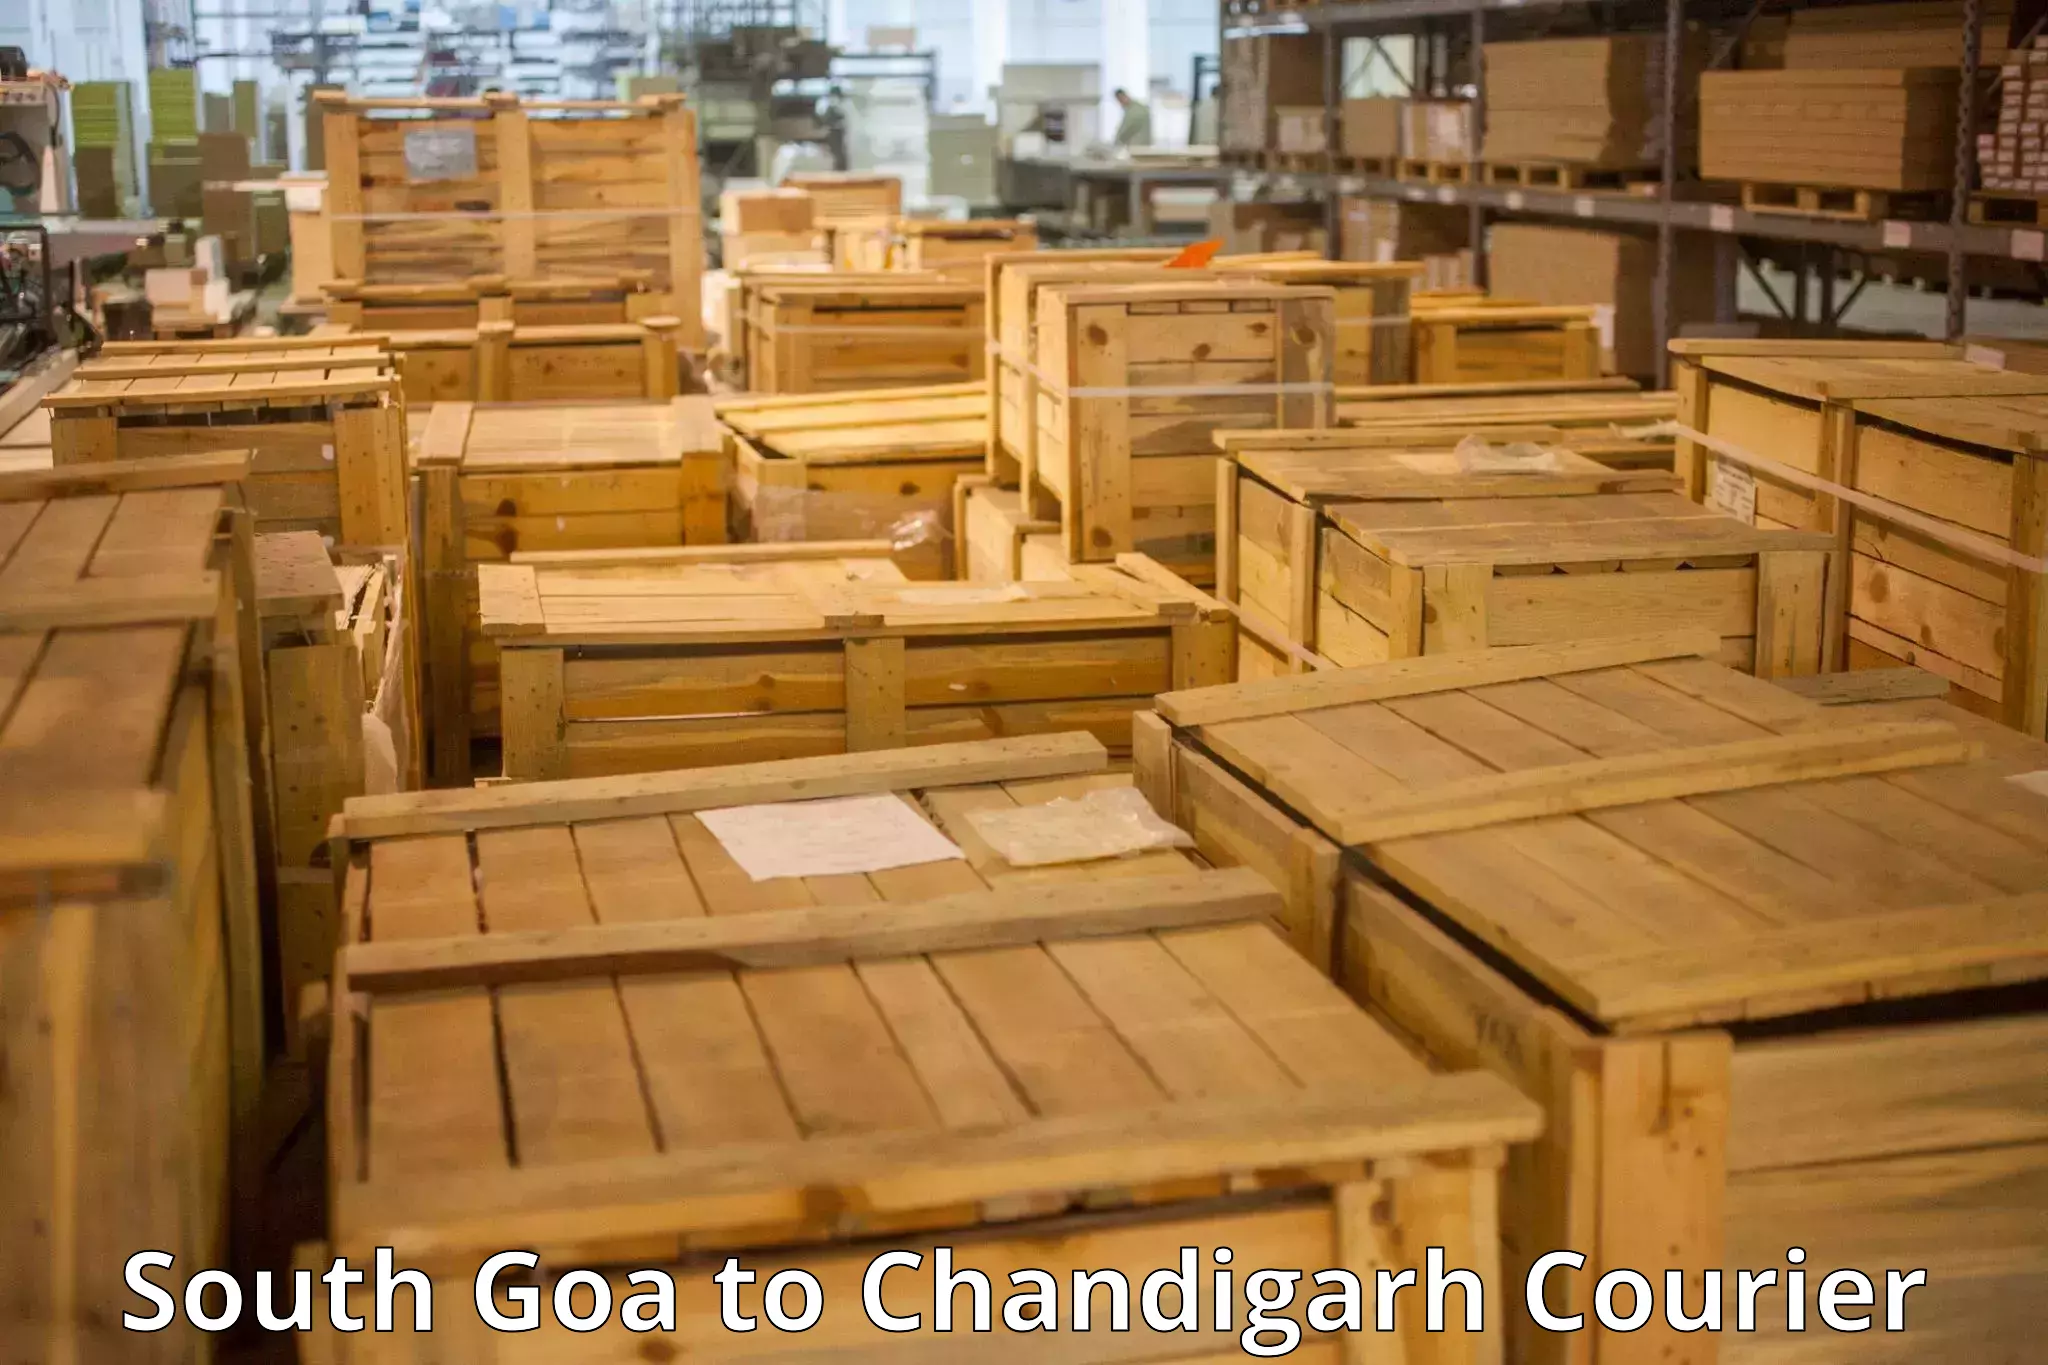 Luggage delivery providers South Goa to Chandigarh